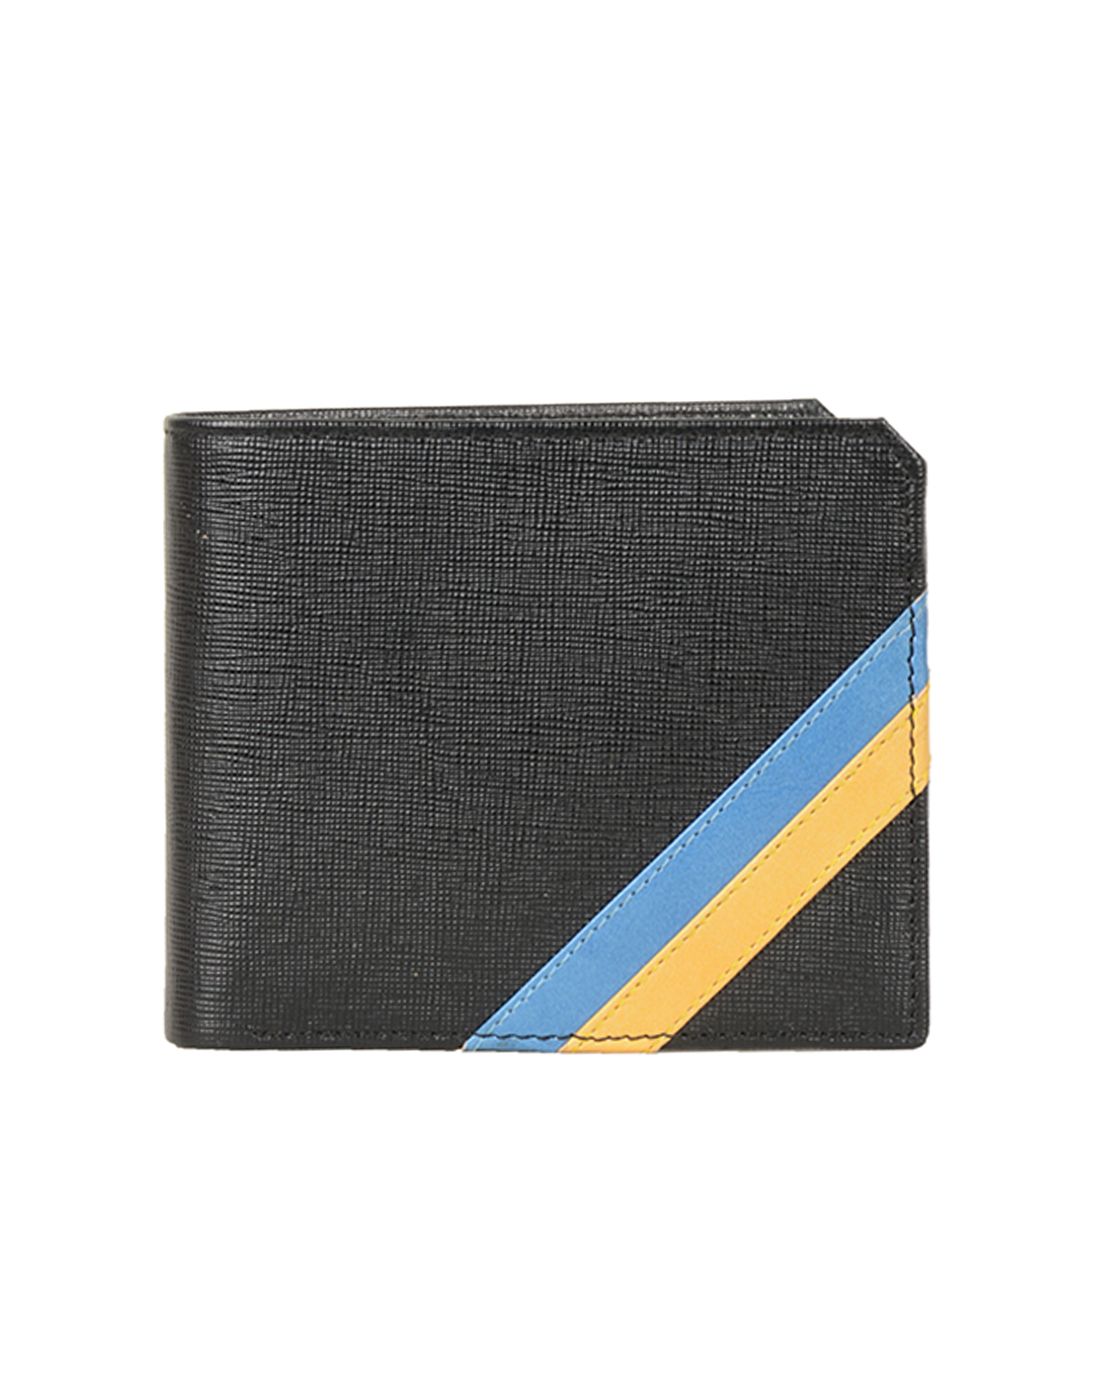 U.S. Polo Assn. Leather Black Casual Regular Wallet: Buy Online at Low